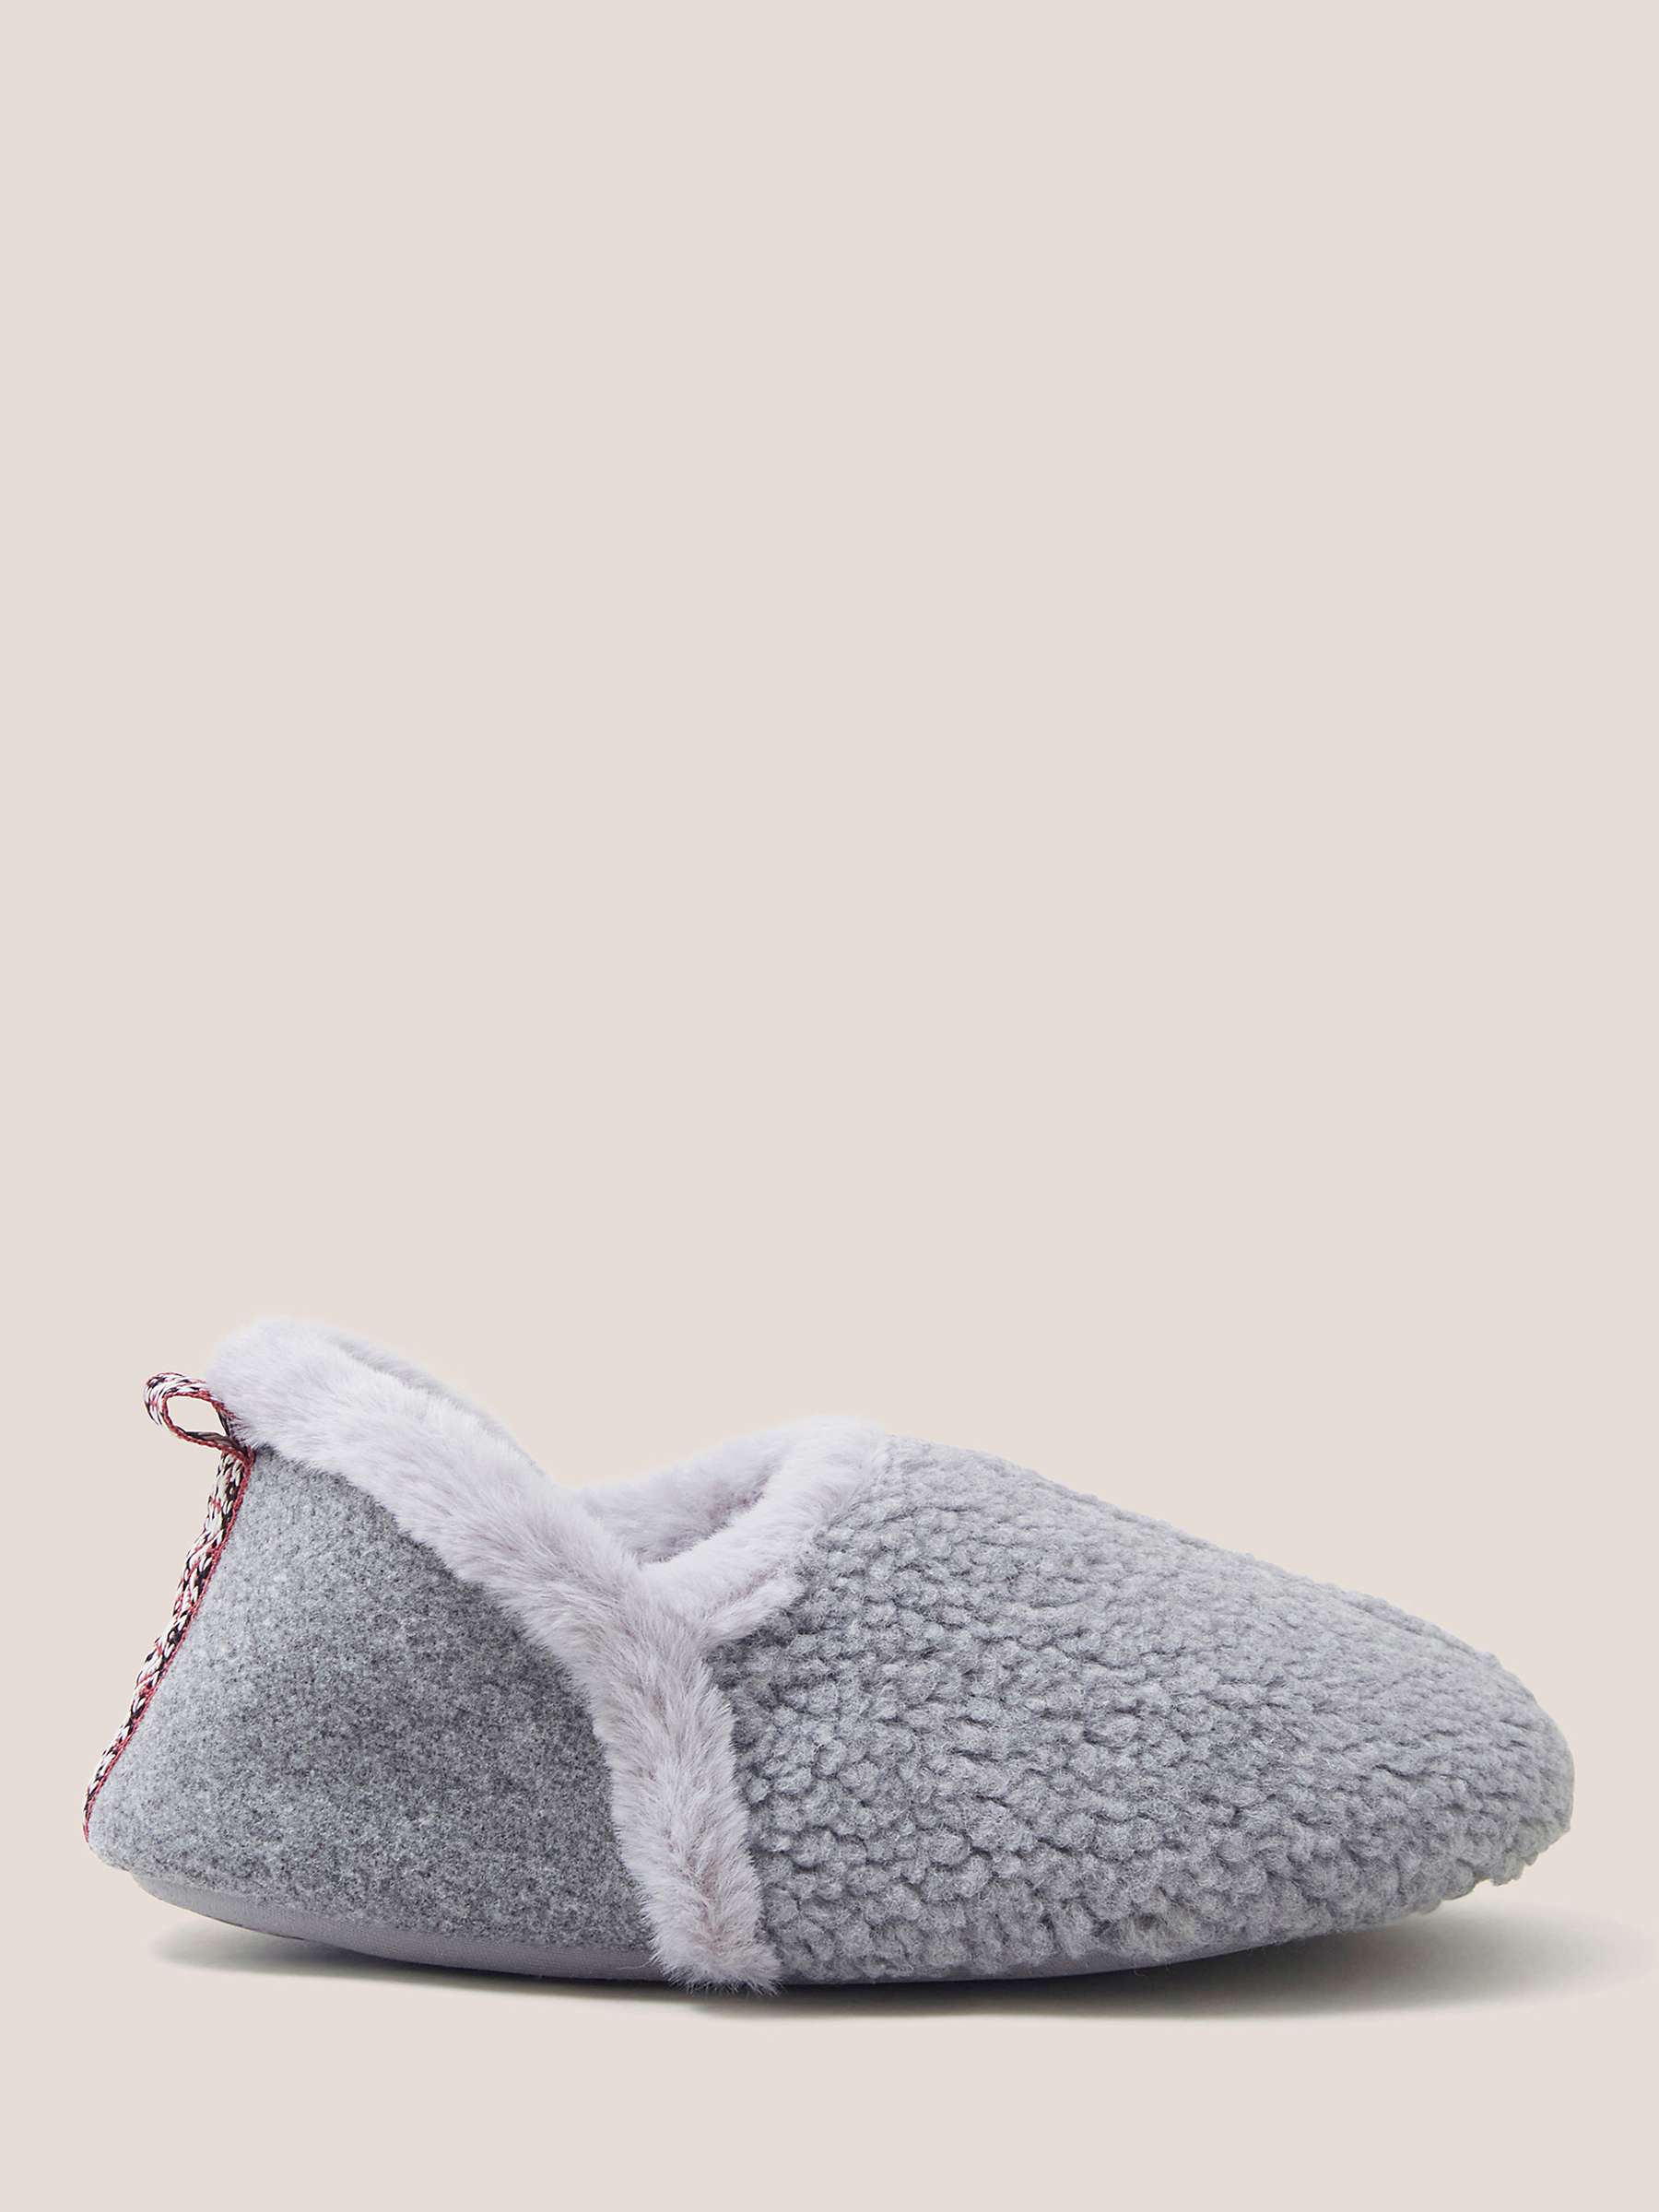 Buy White Stuff Reya Closed Back Slippers, Mid Grey Online at johnlewis.com